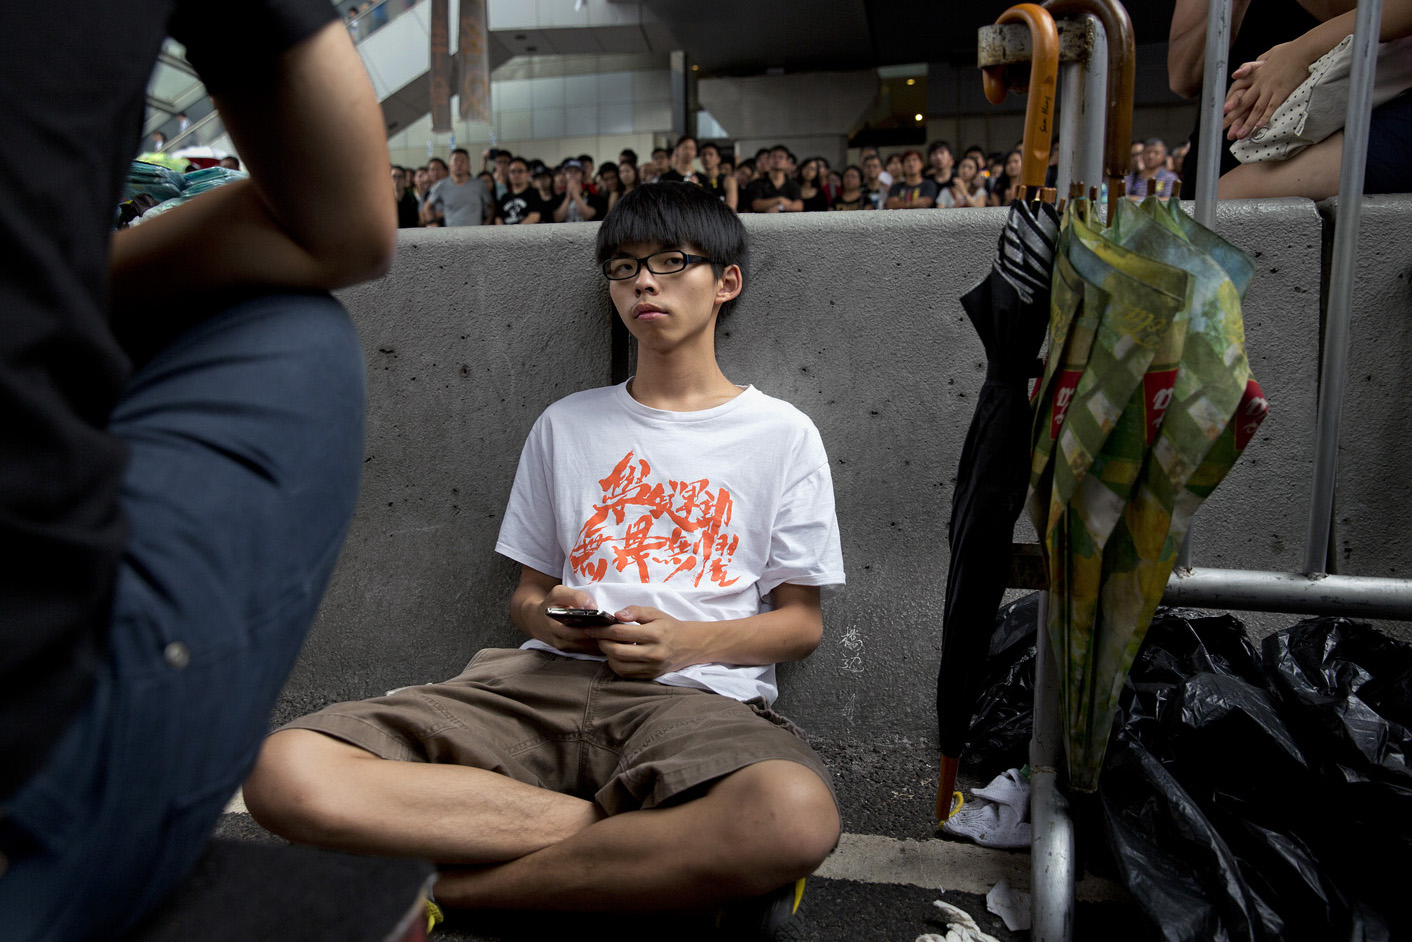 Joshua Wong, 17-year-old protest leader, is a co-founder of the group Scholarism, which helped kick-start the Hong Kong protests (James Nachtwey for TIME)